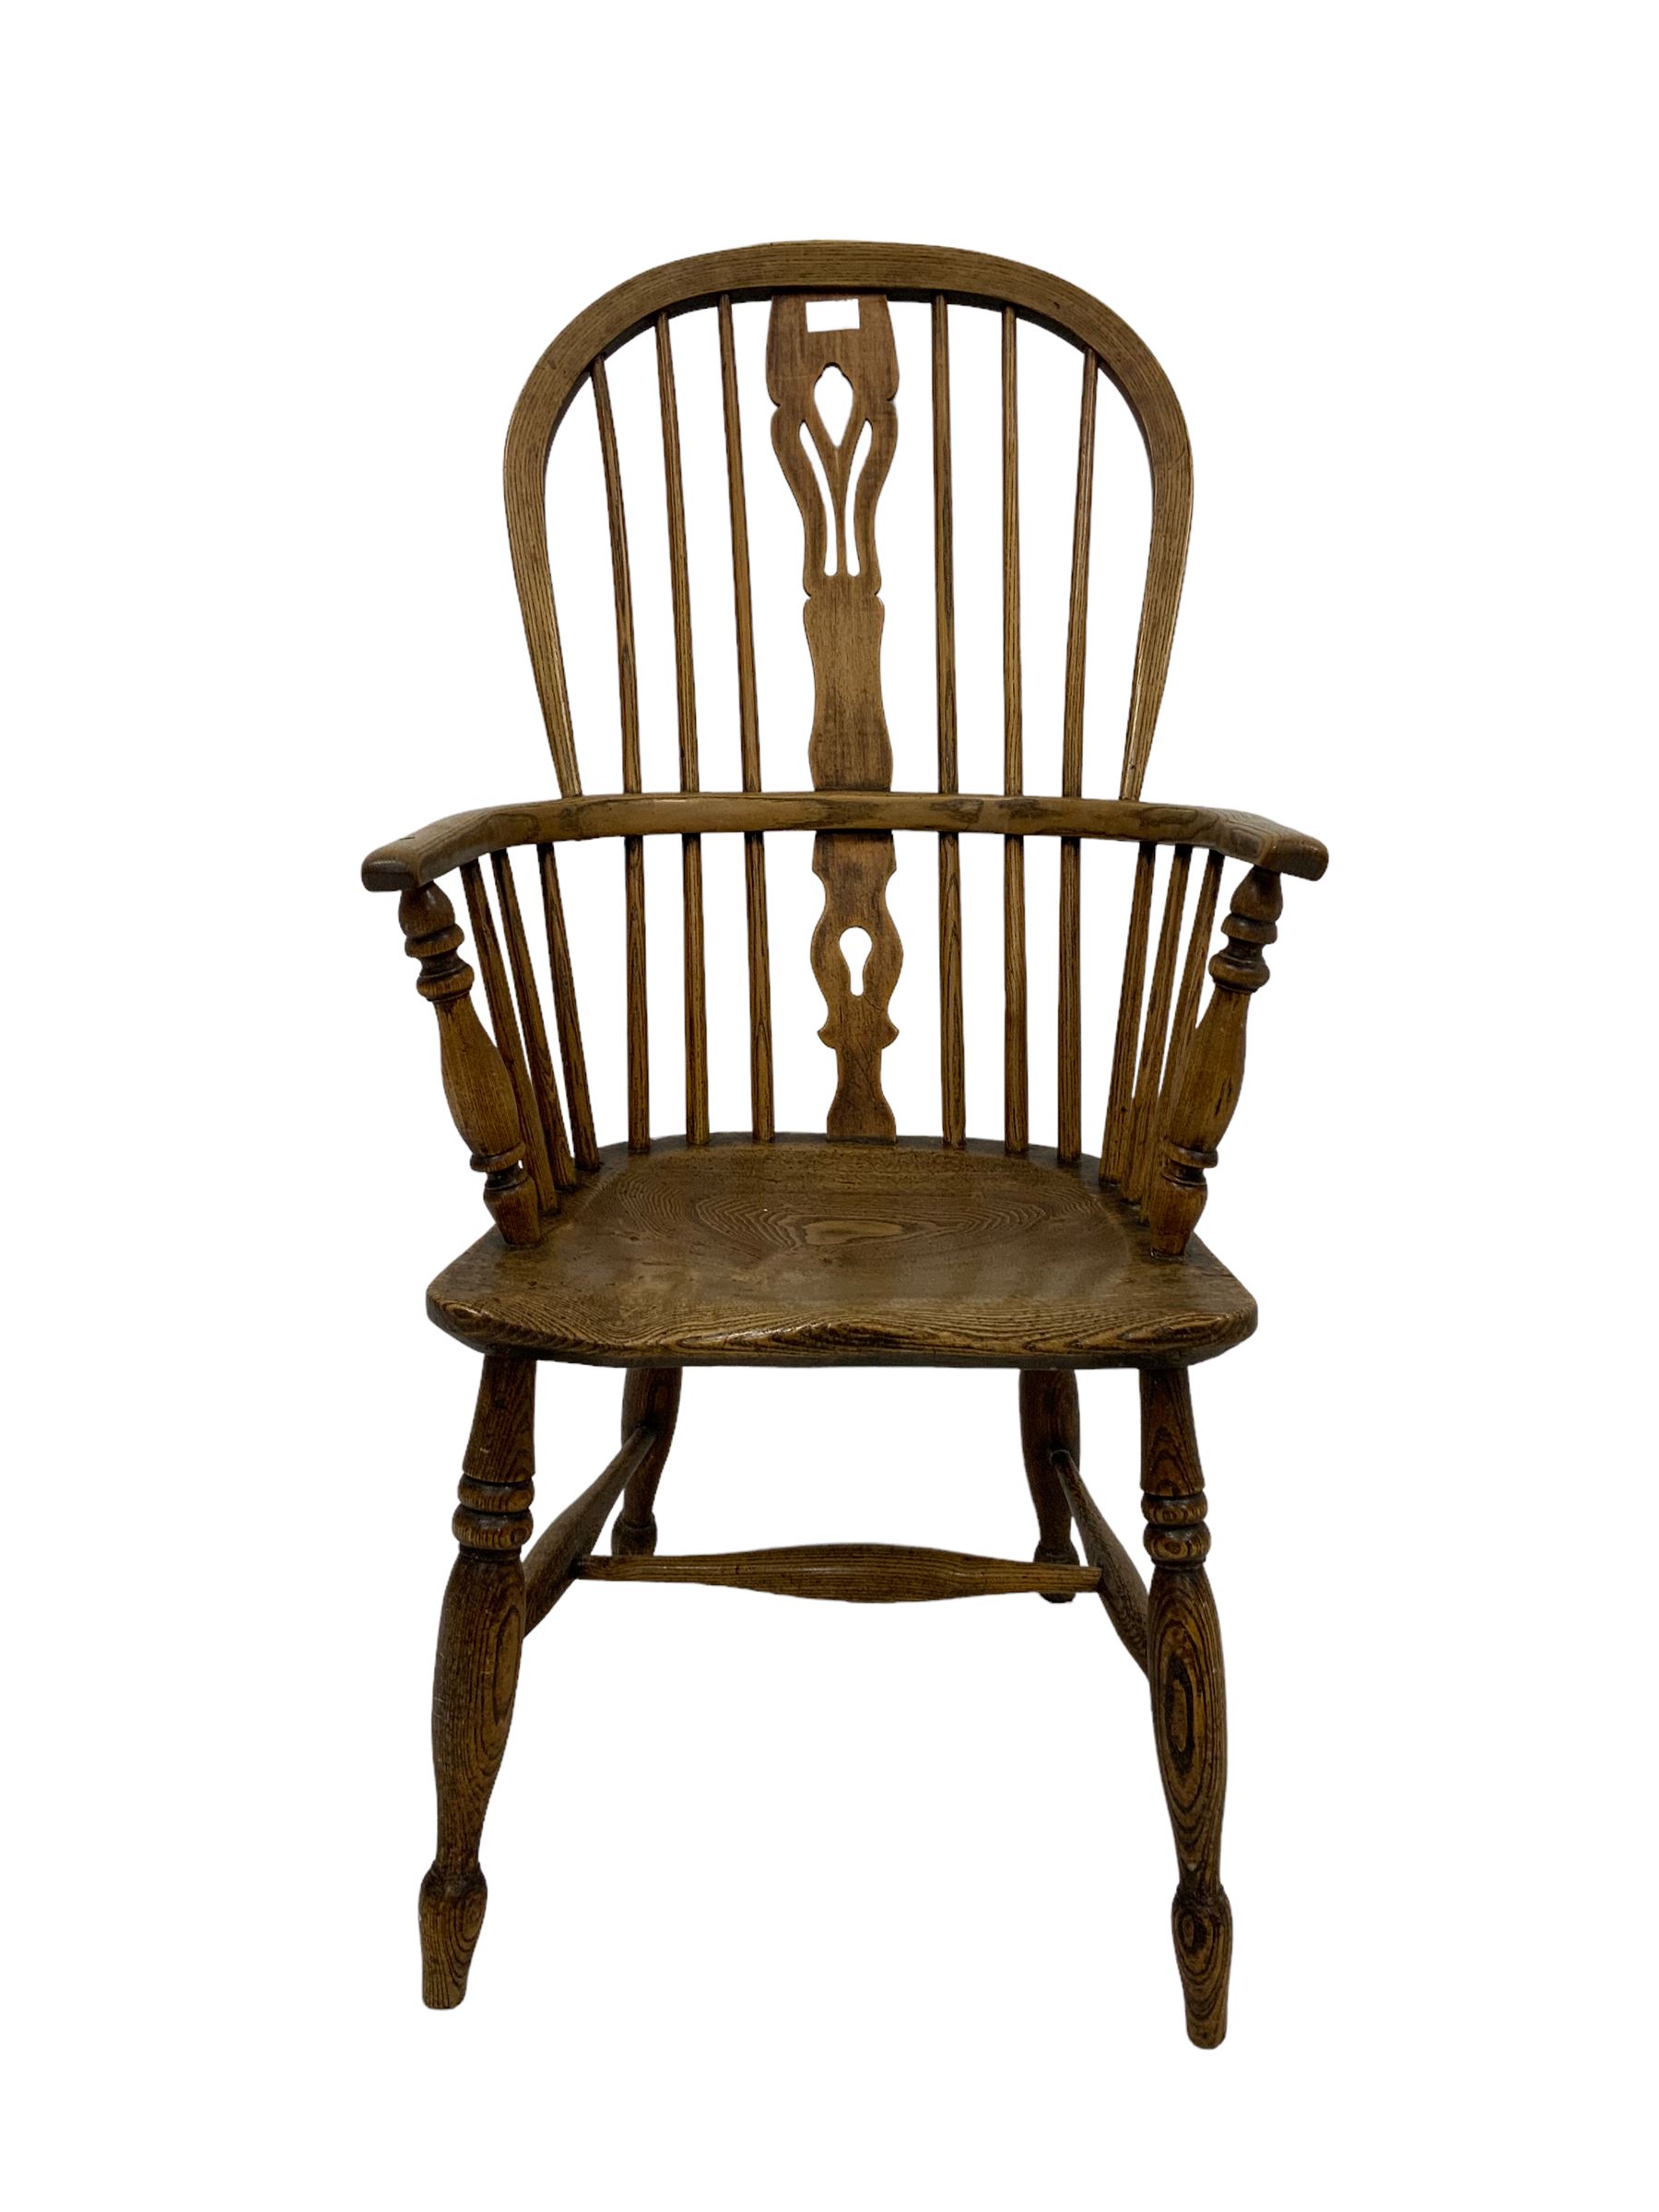 19th century elm Windsor chair - Image 3 of 4